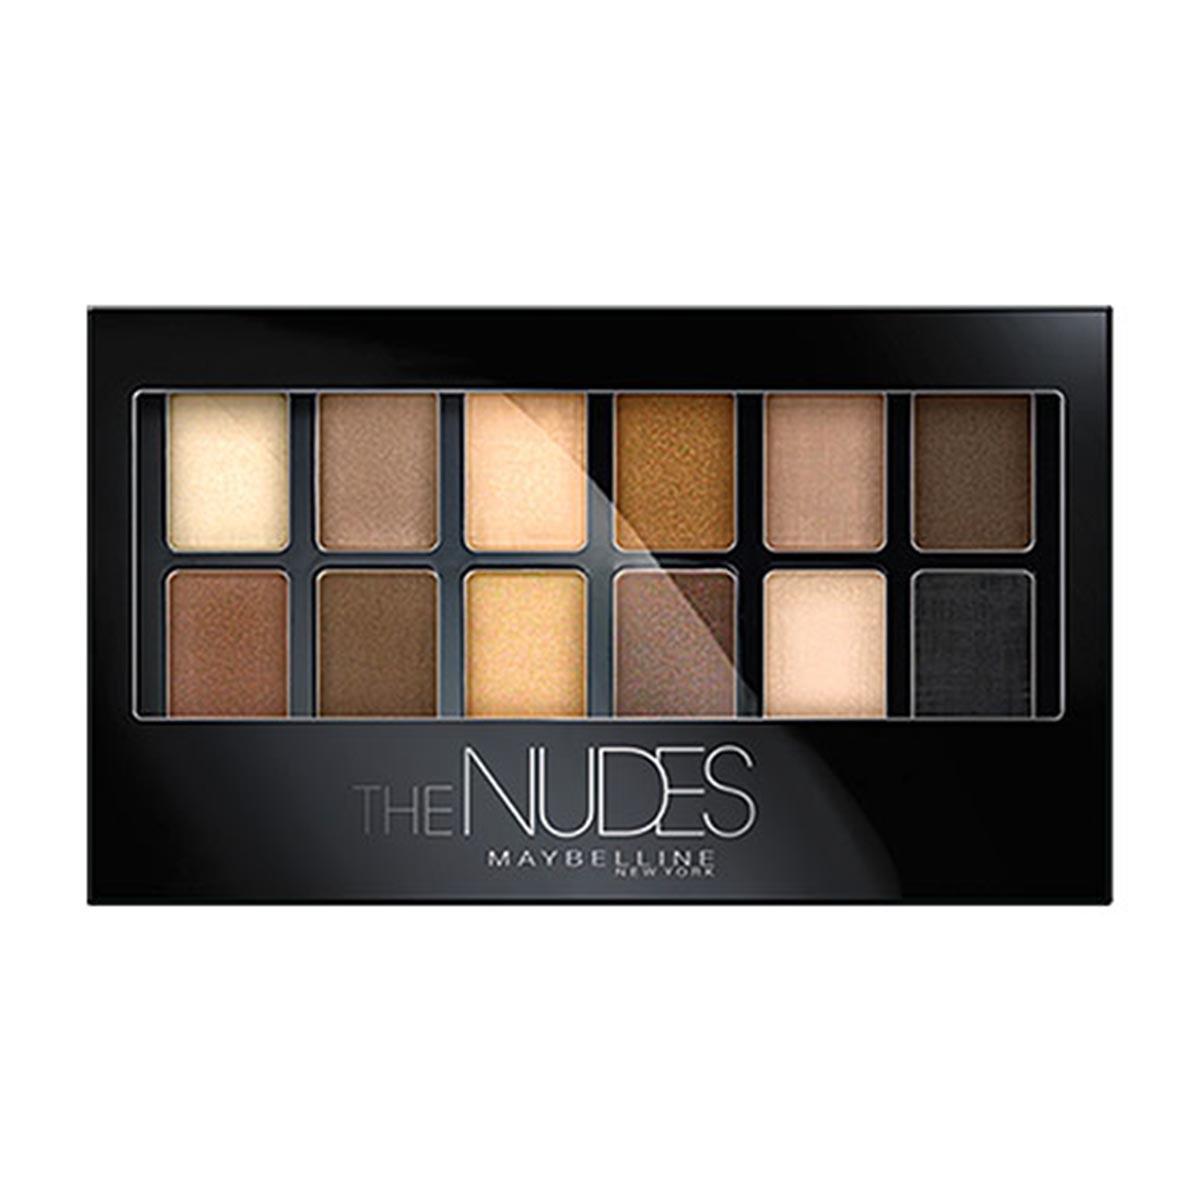 maybelline-the-nudes-palette-01-powder